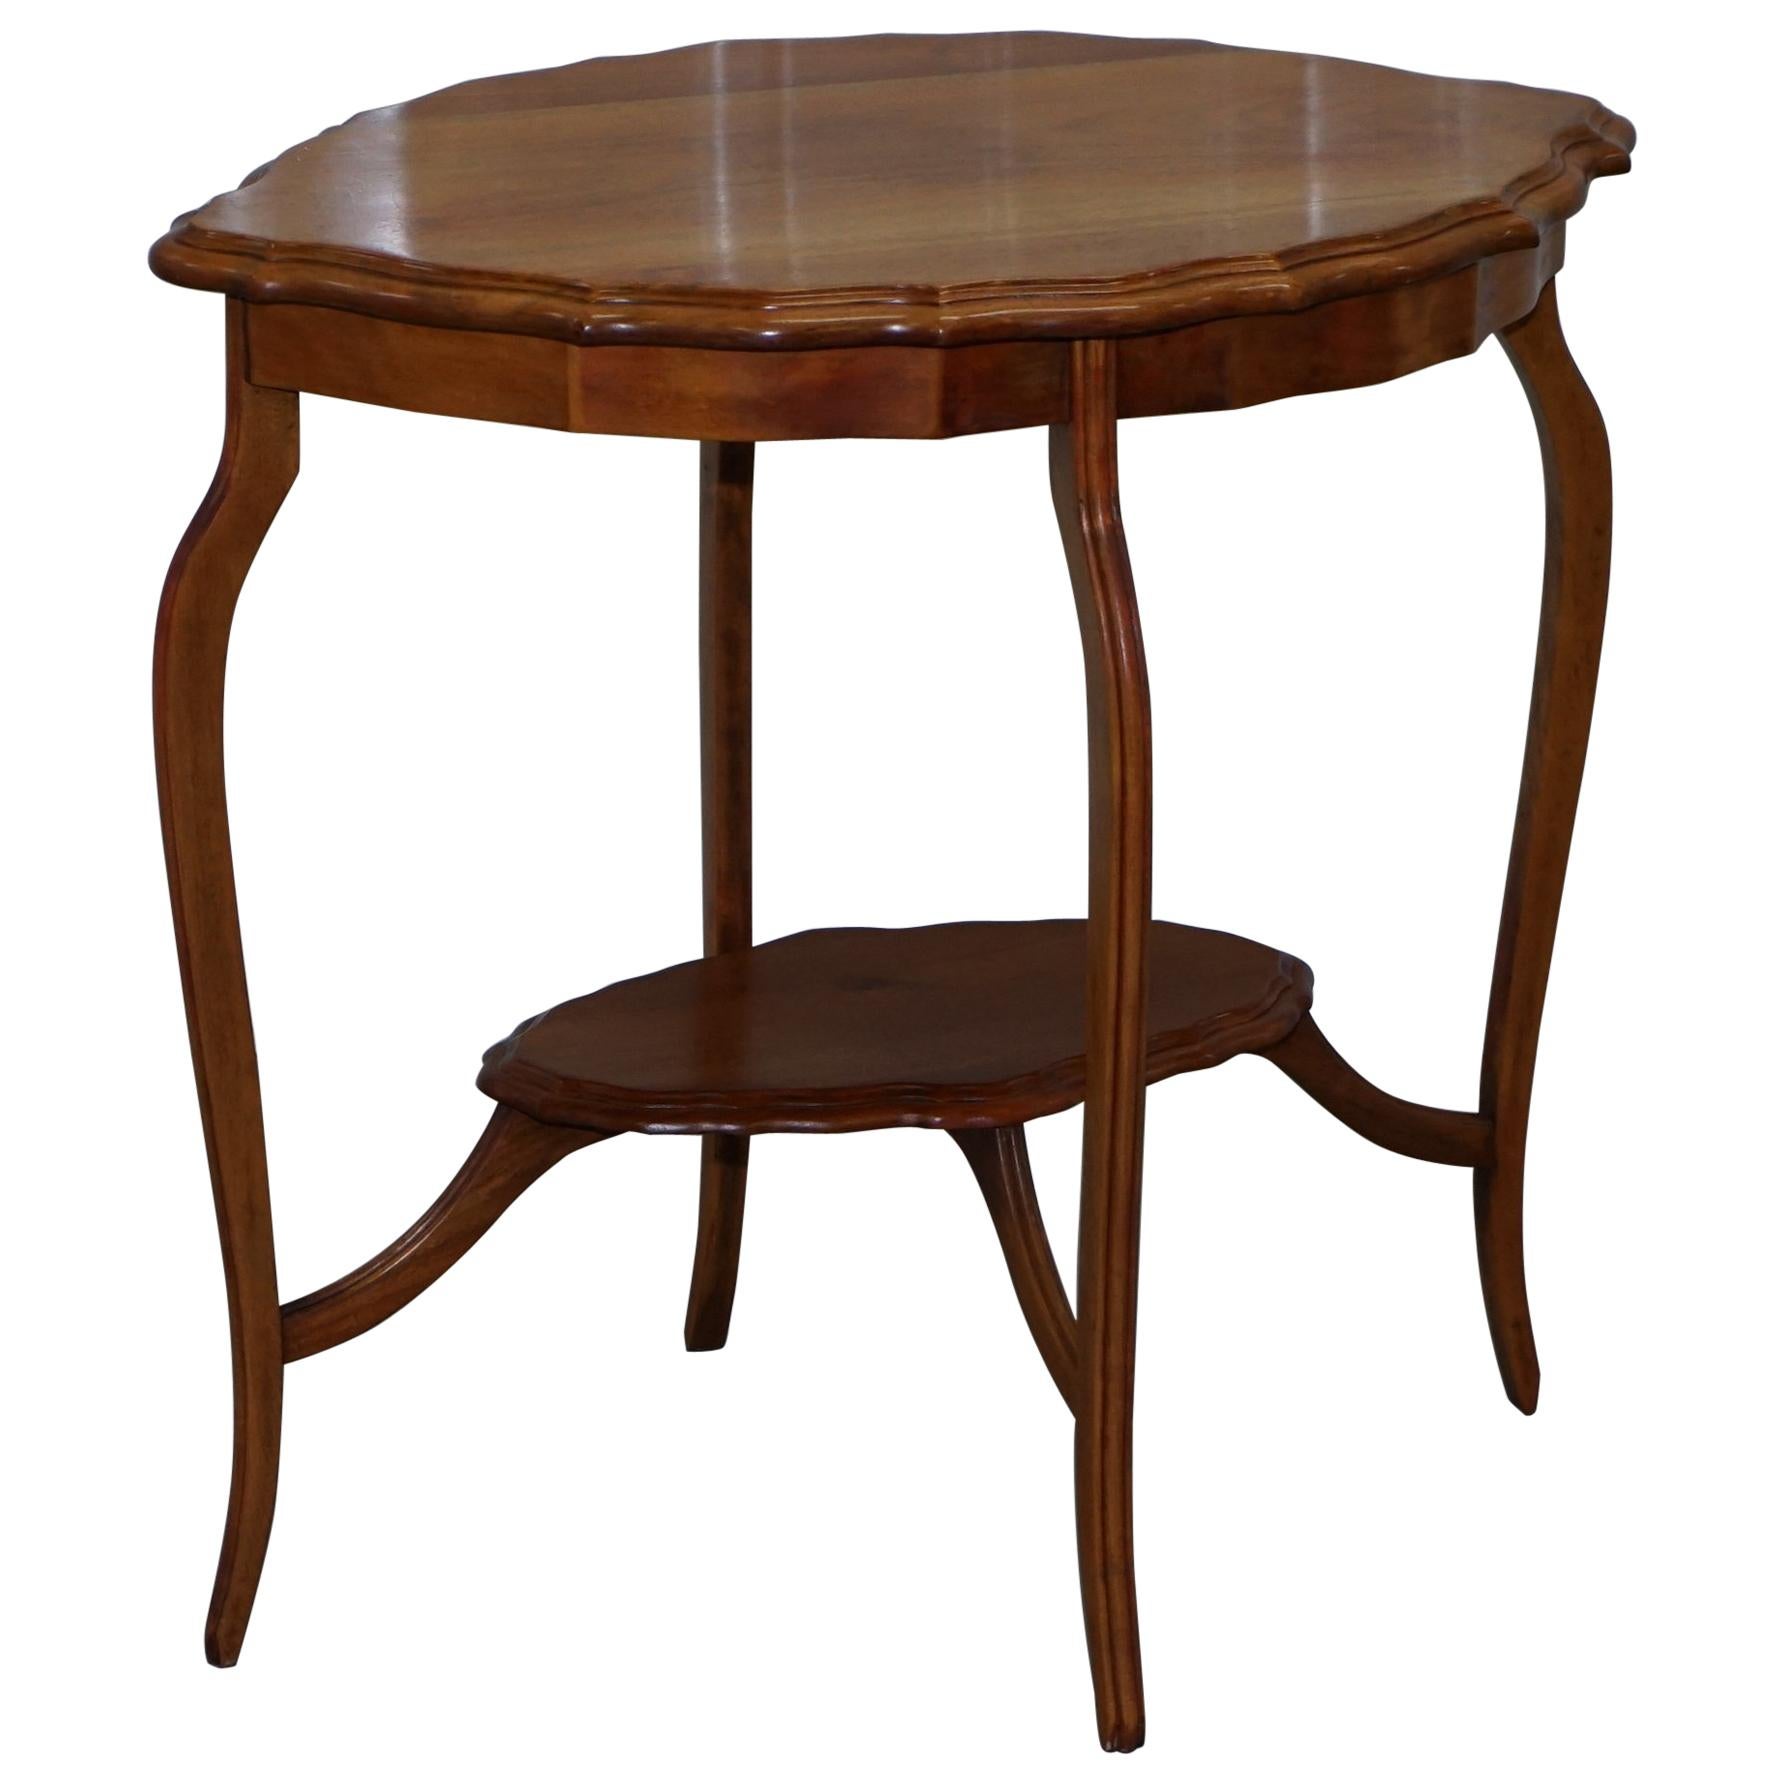 Lovely Decorative Satinwood Occasional Centre Table Scalloped Edge Ornate Legs For Sale